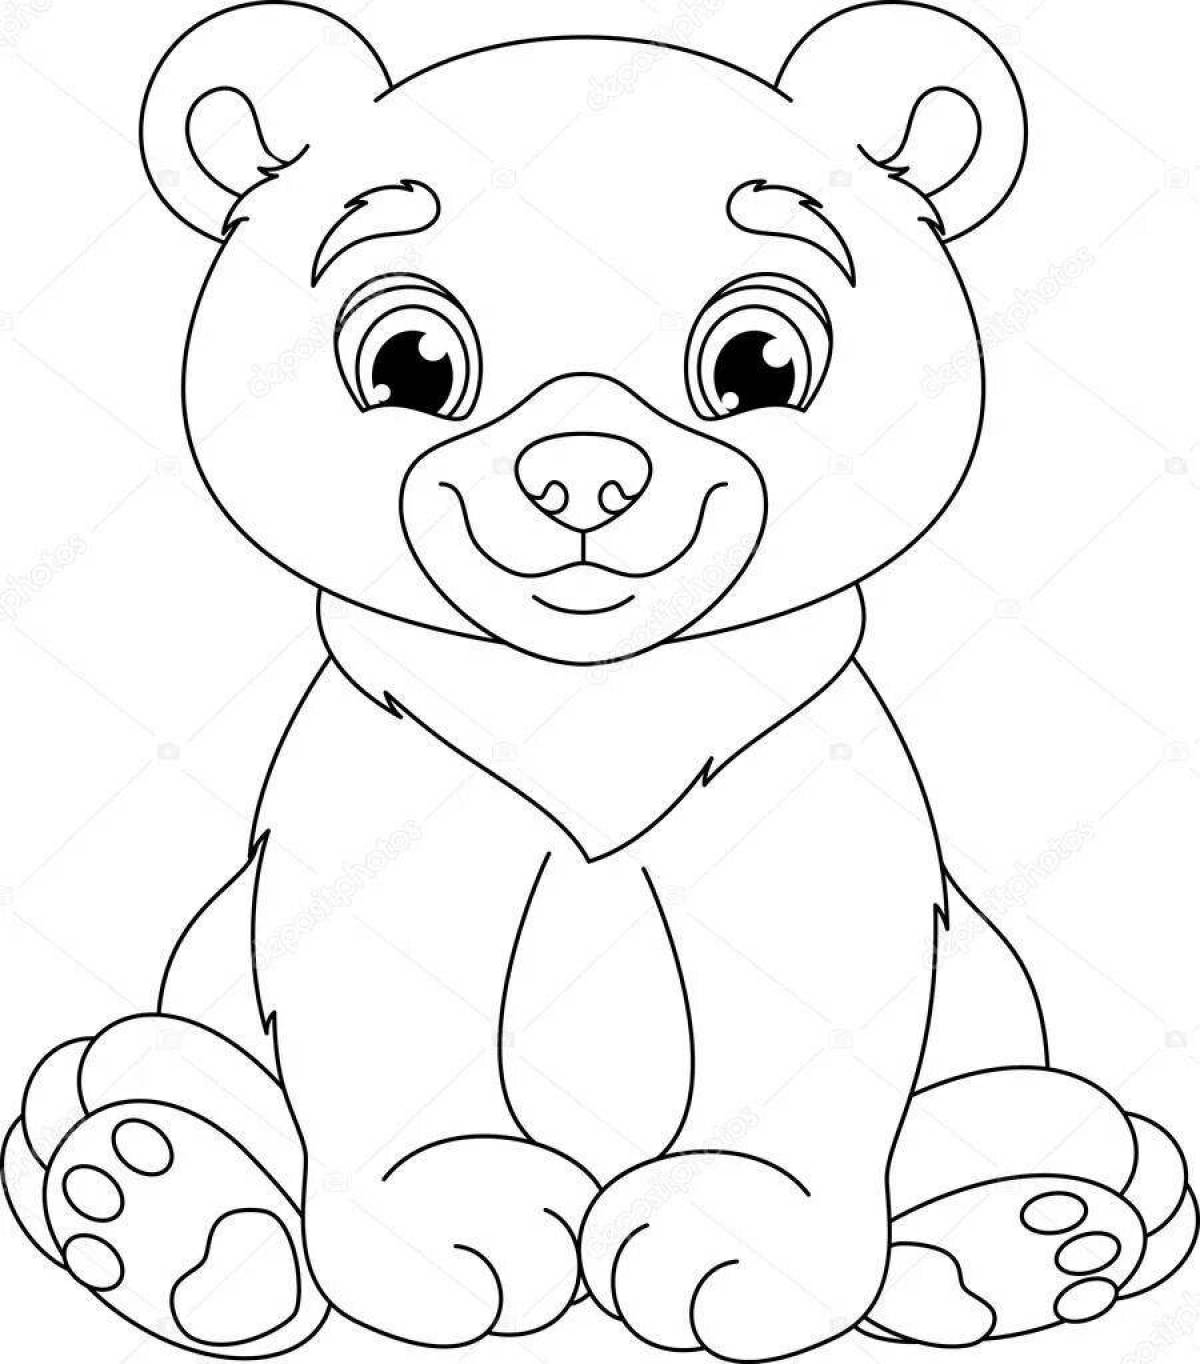 Coloring game frolicking teddy bear